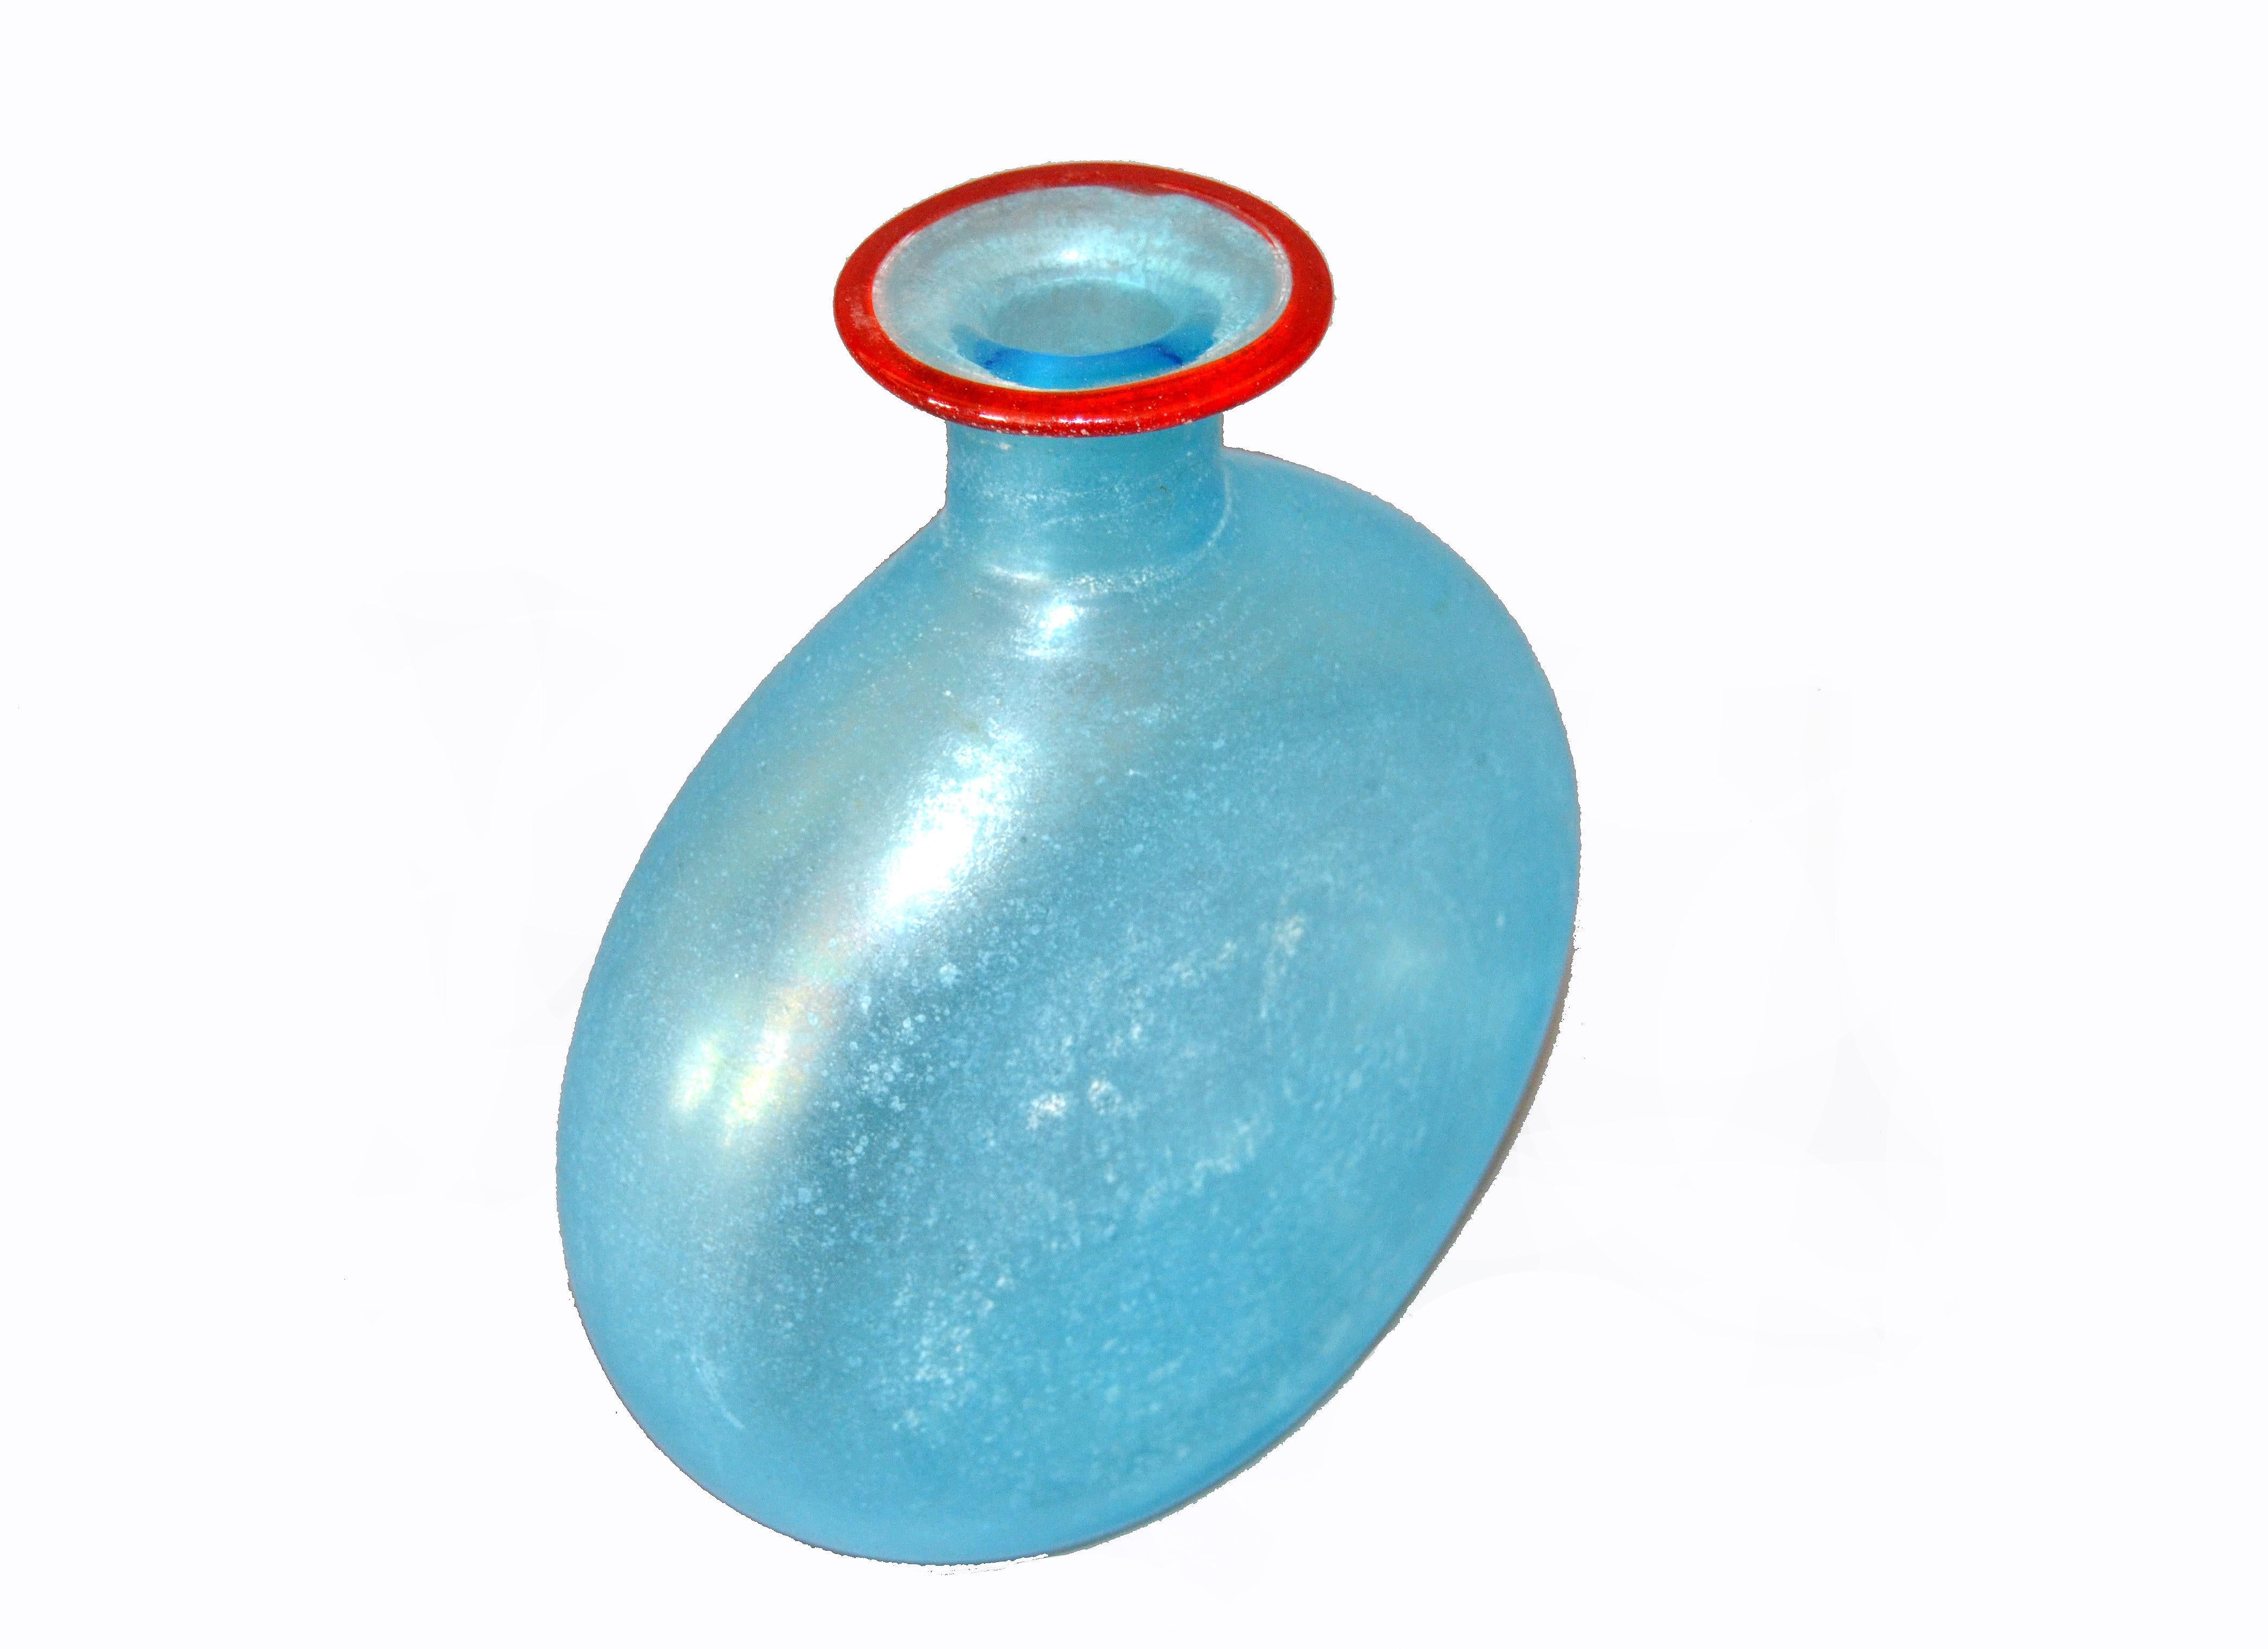 Late 20th Century Venetian Blue Murano Art Glass Decanter, Vessel with Red Stopper, Italy